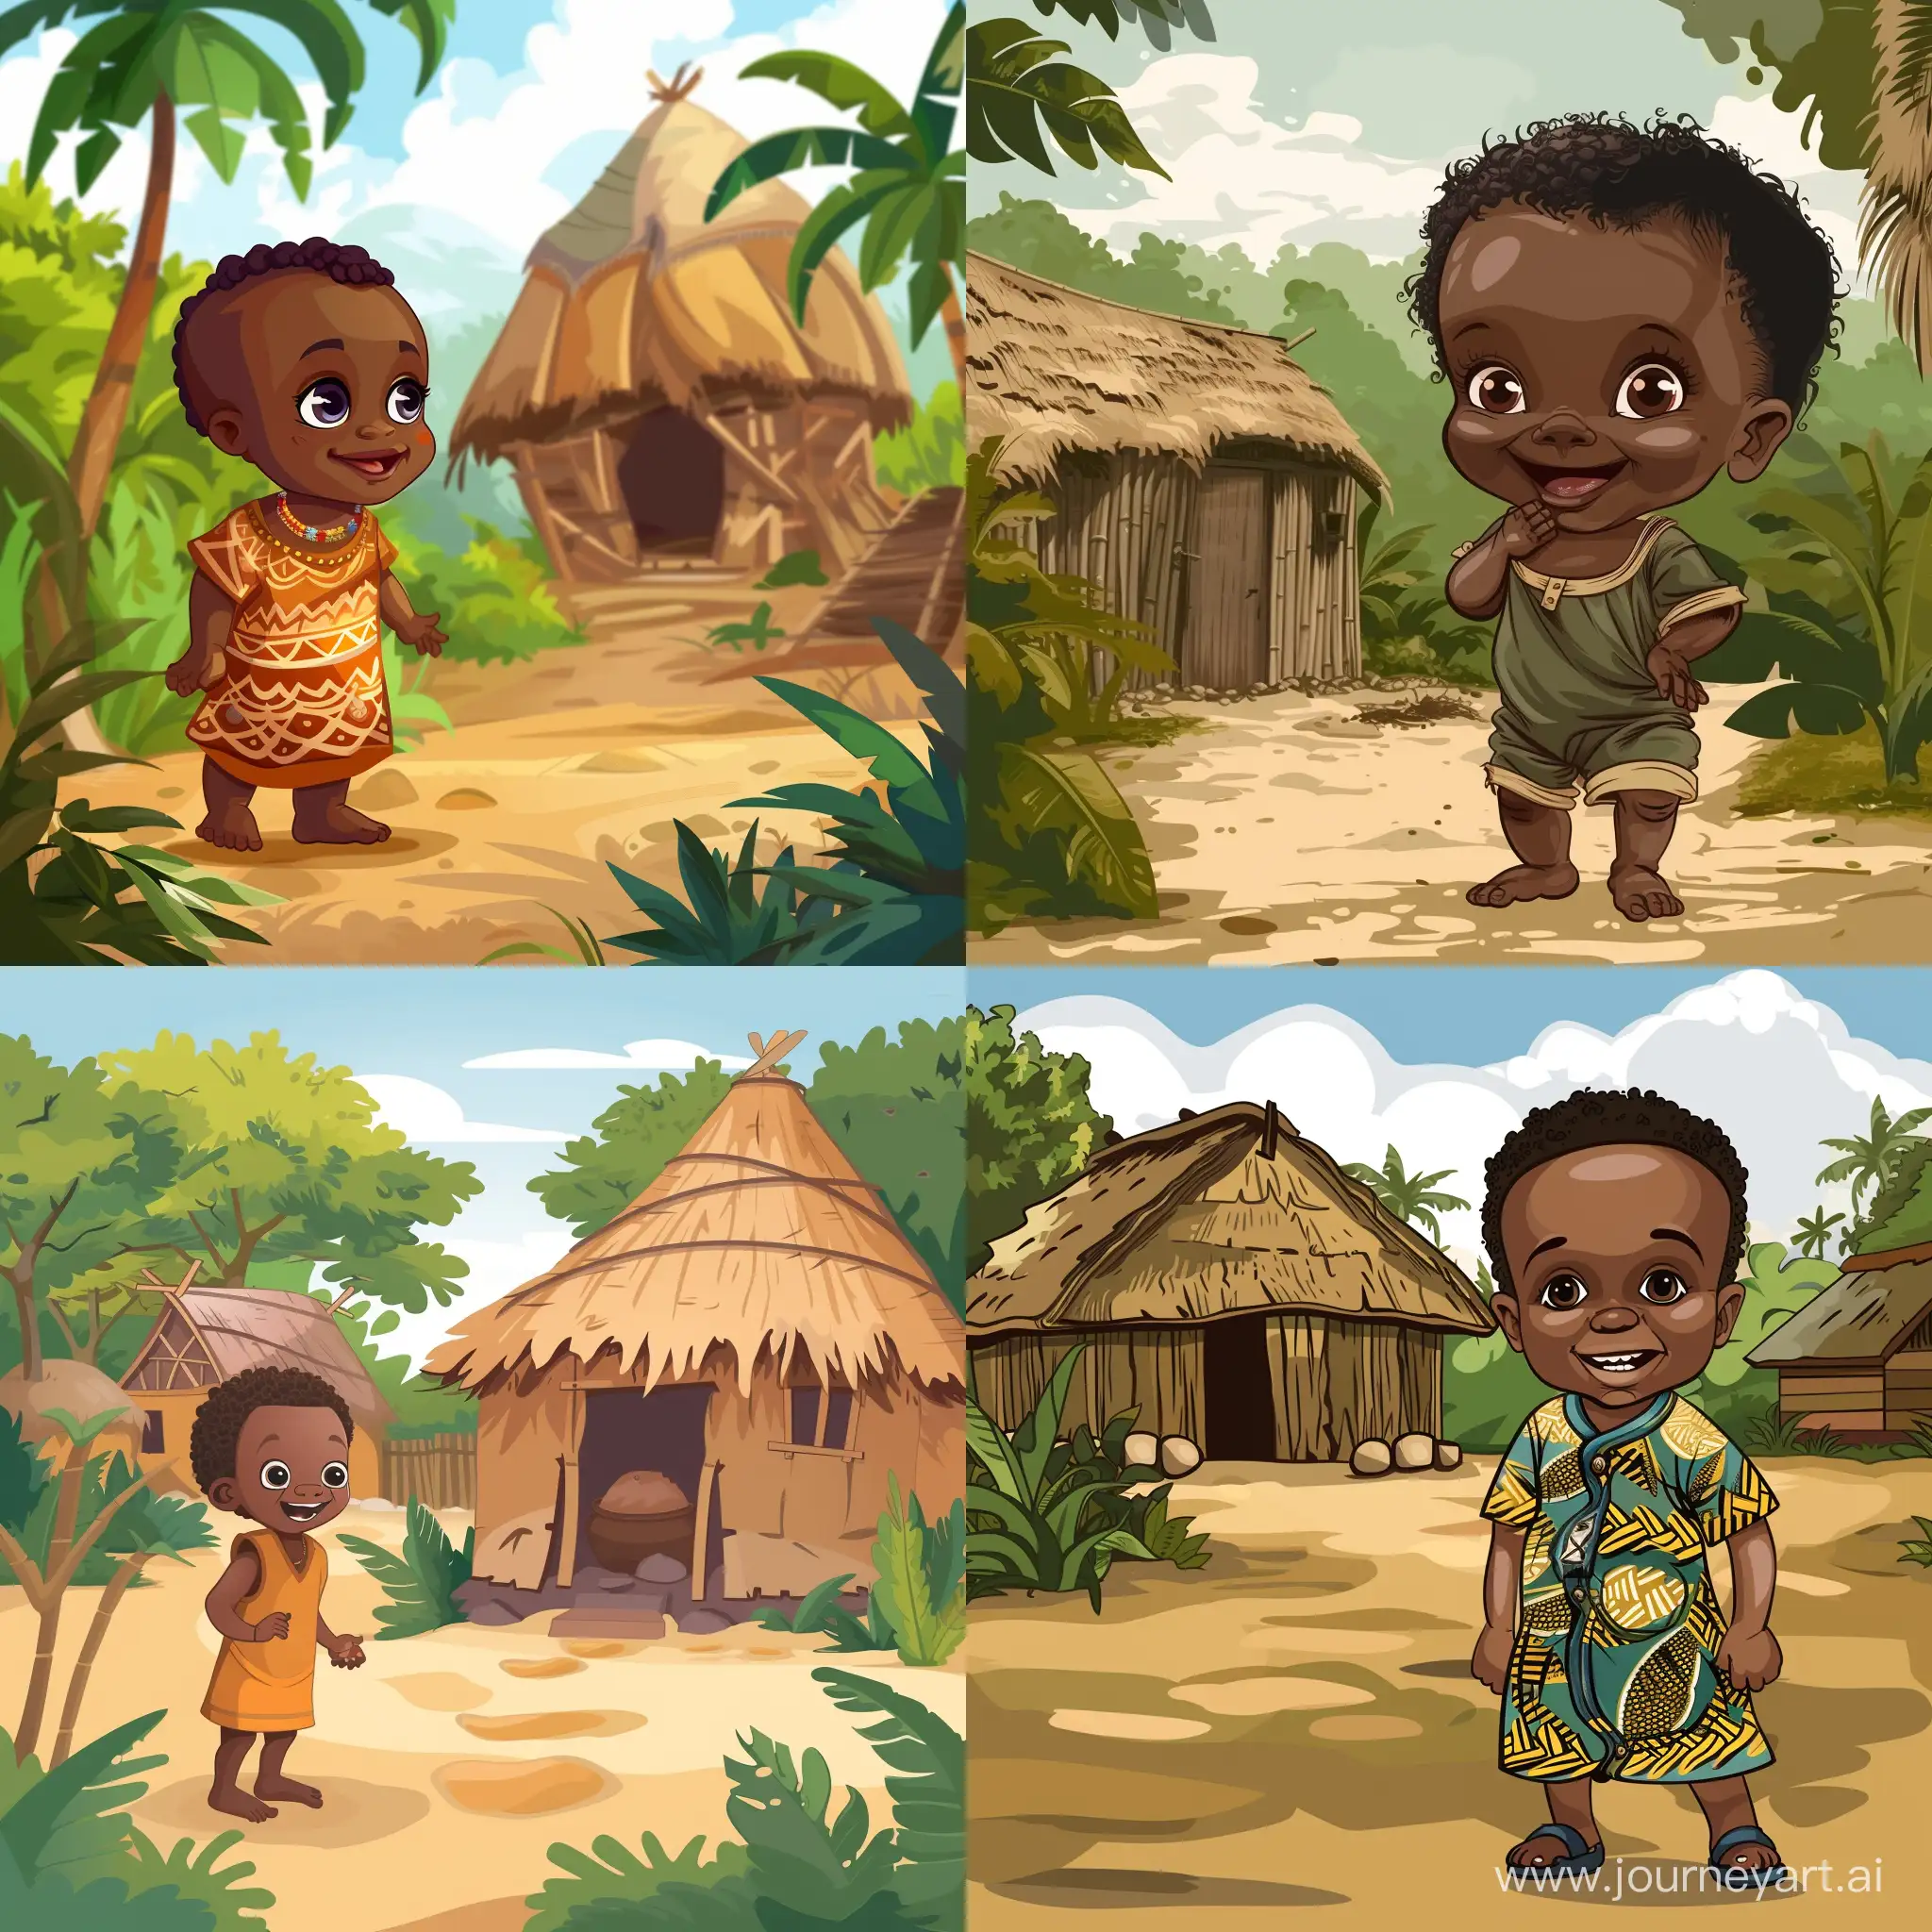 African baby of 2 years as a cartoon in a village near a hut